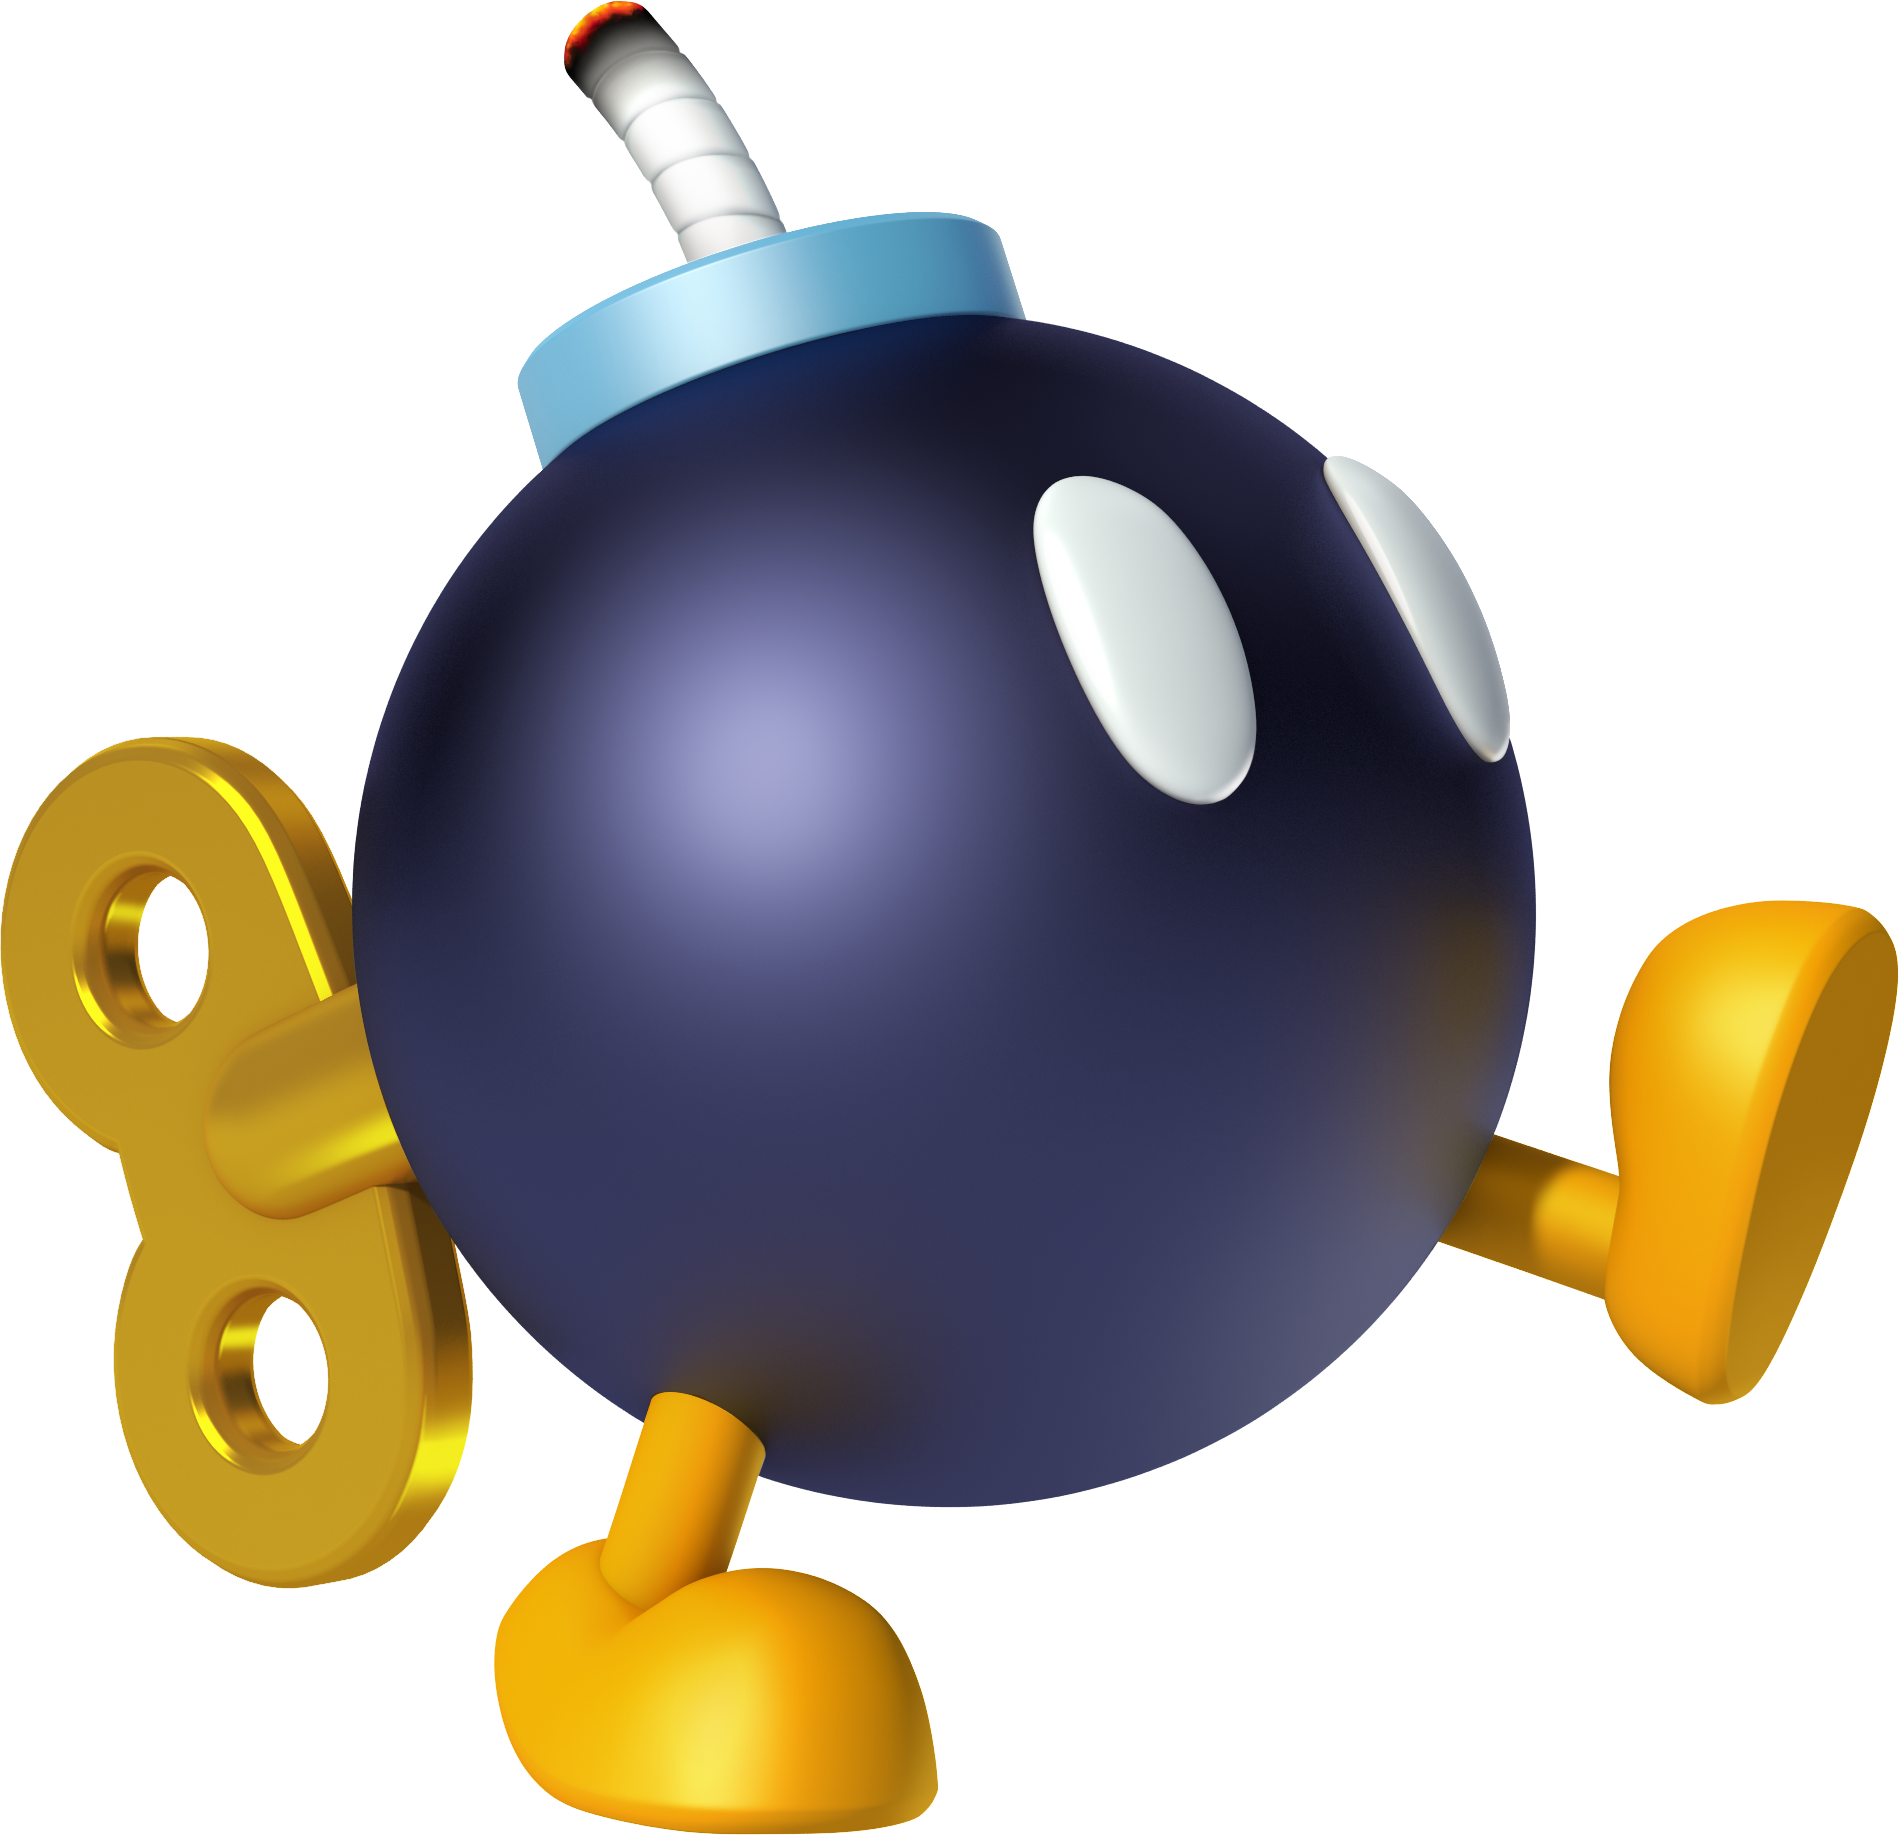 The Bob Omb From Super Mario Bros